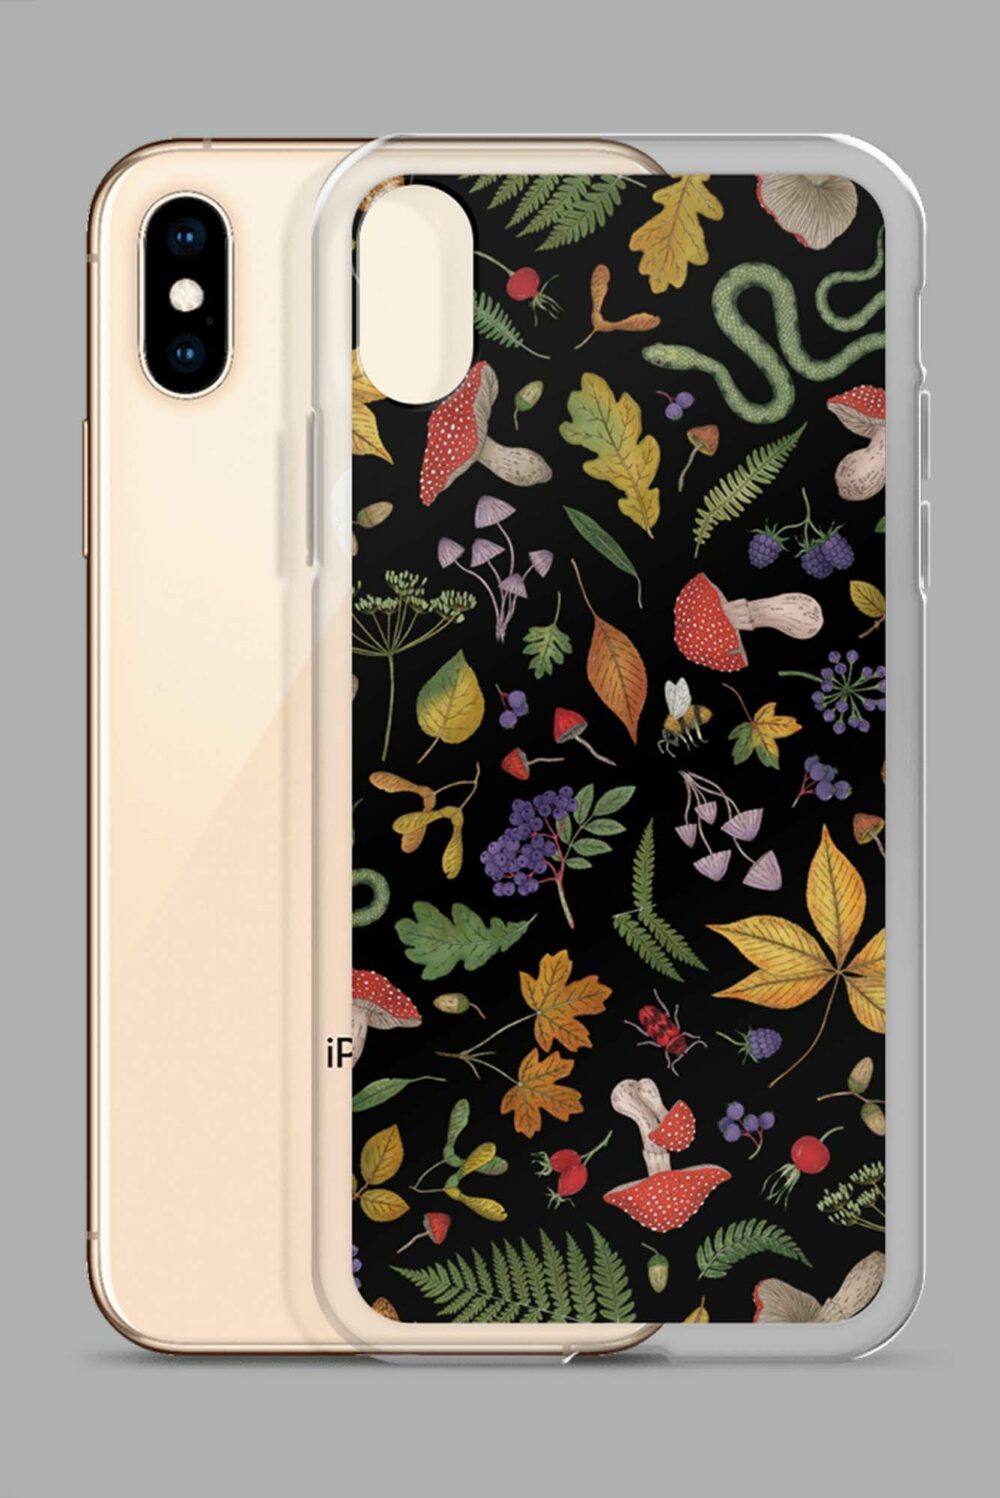 cosmic drifters hedge witch clear case for iphone iphone x xs case with phone 64e2646b227d7